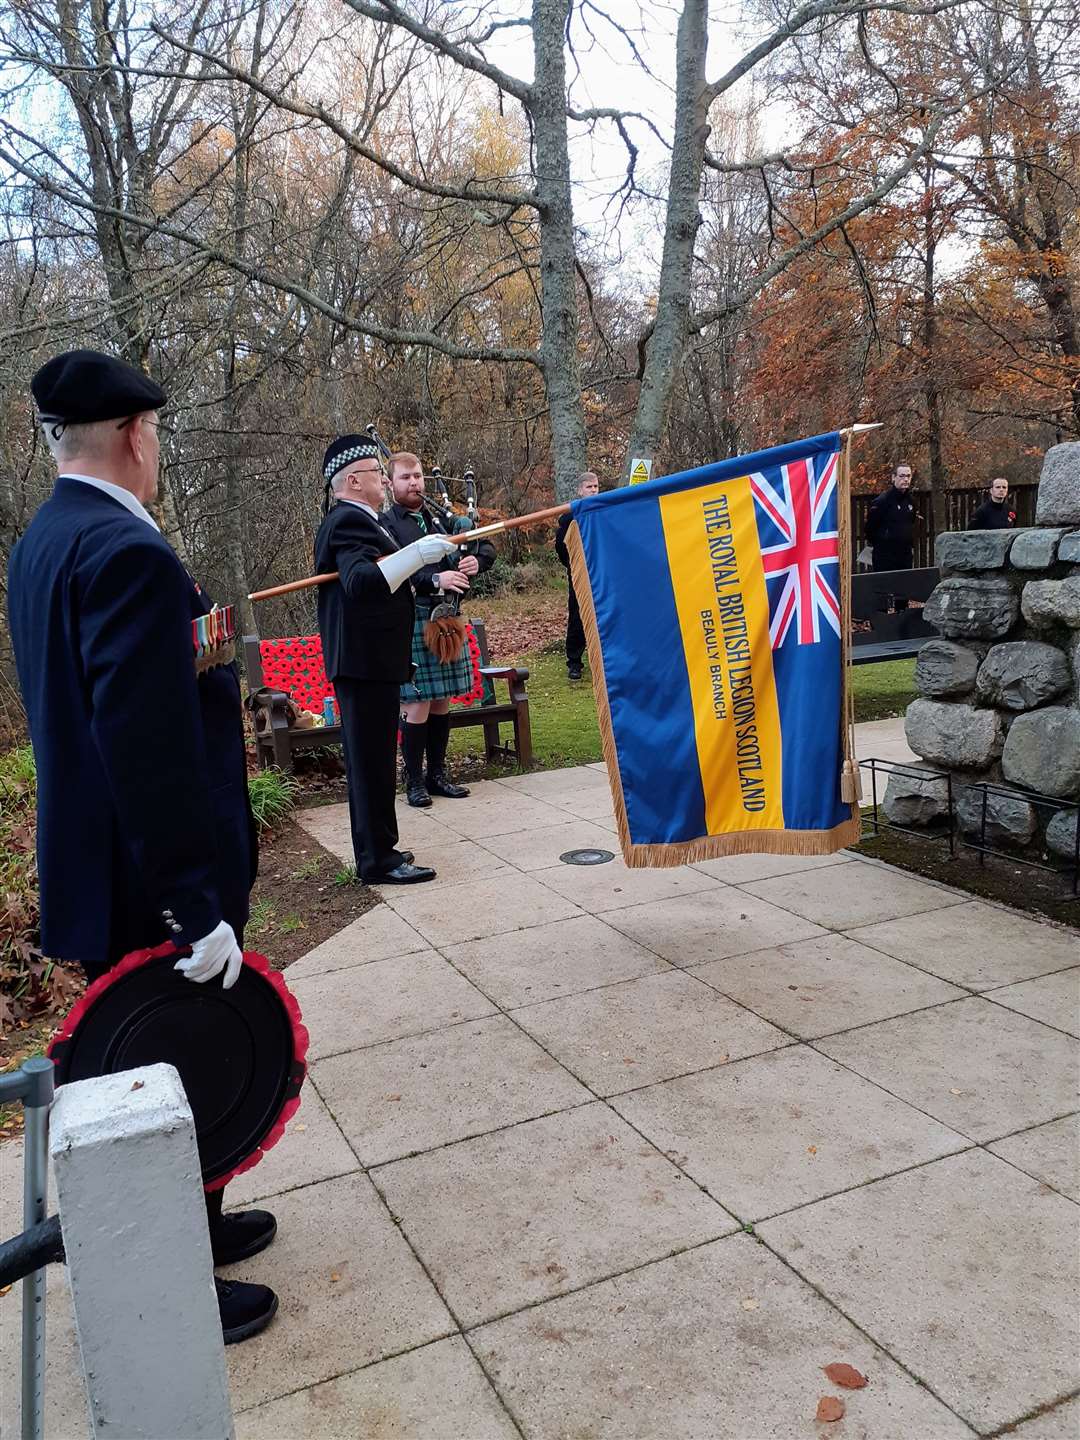 Members of the Beauly and district branch of the Royal British Legion Scotland take part in the Remembrance Sunday events.